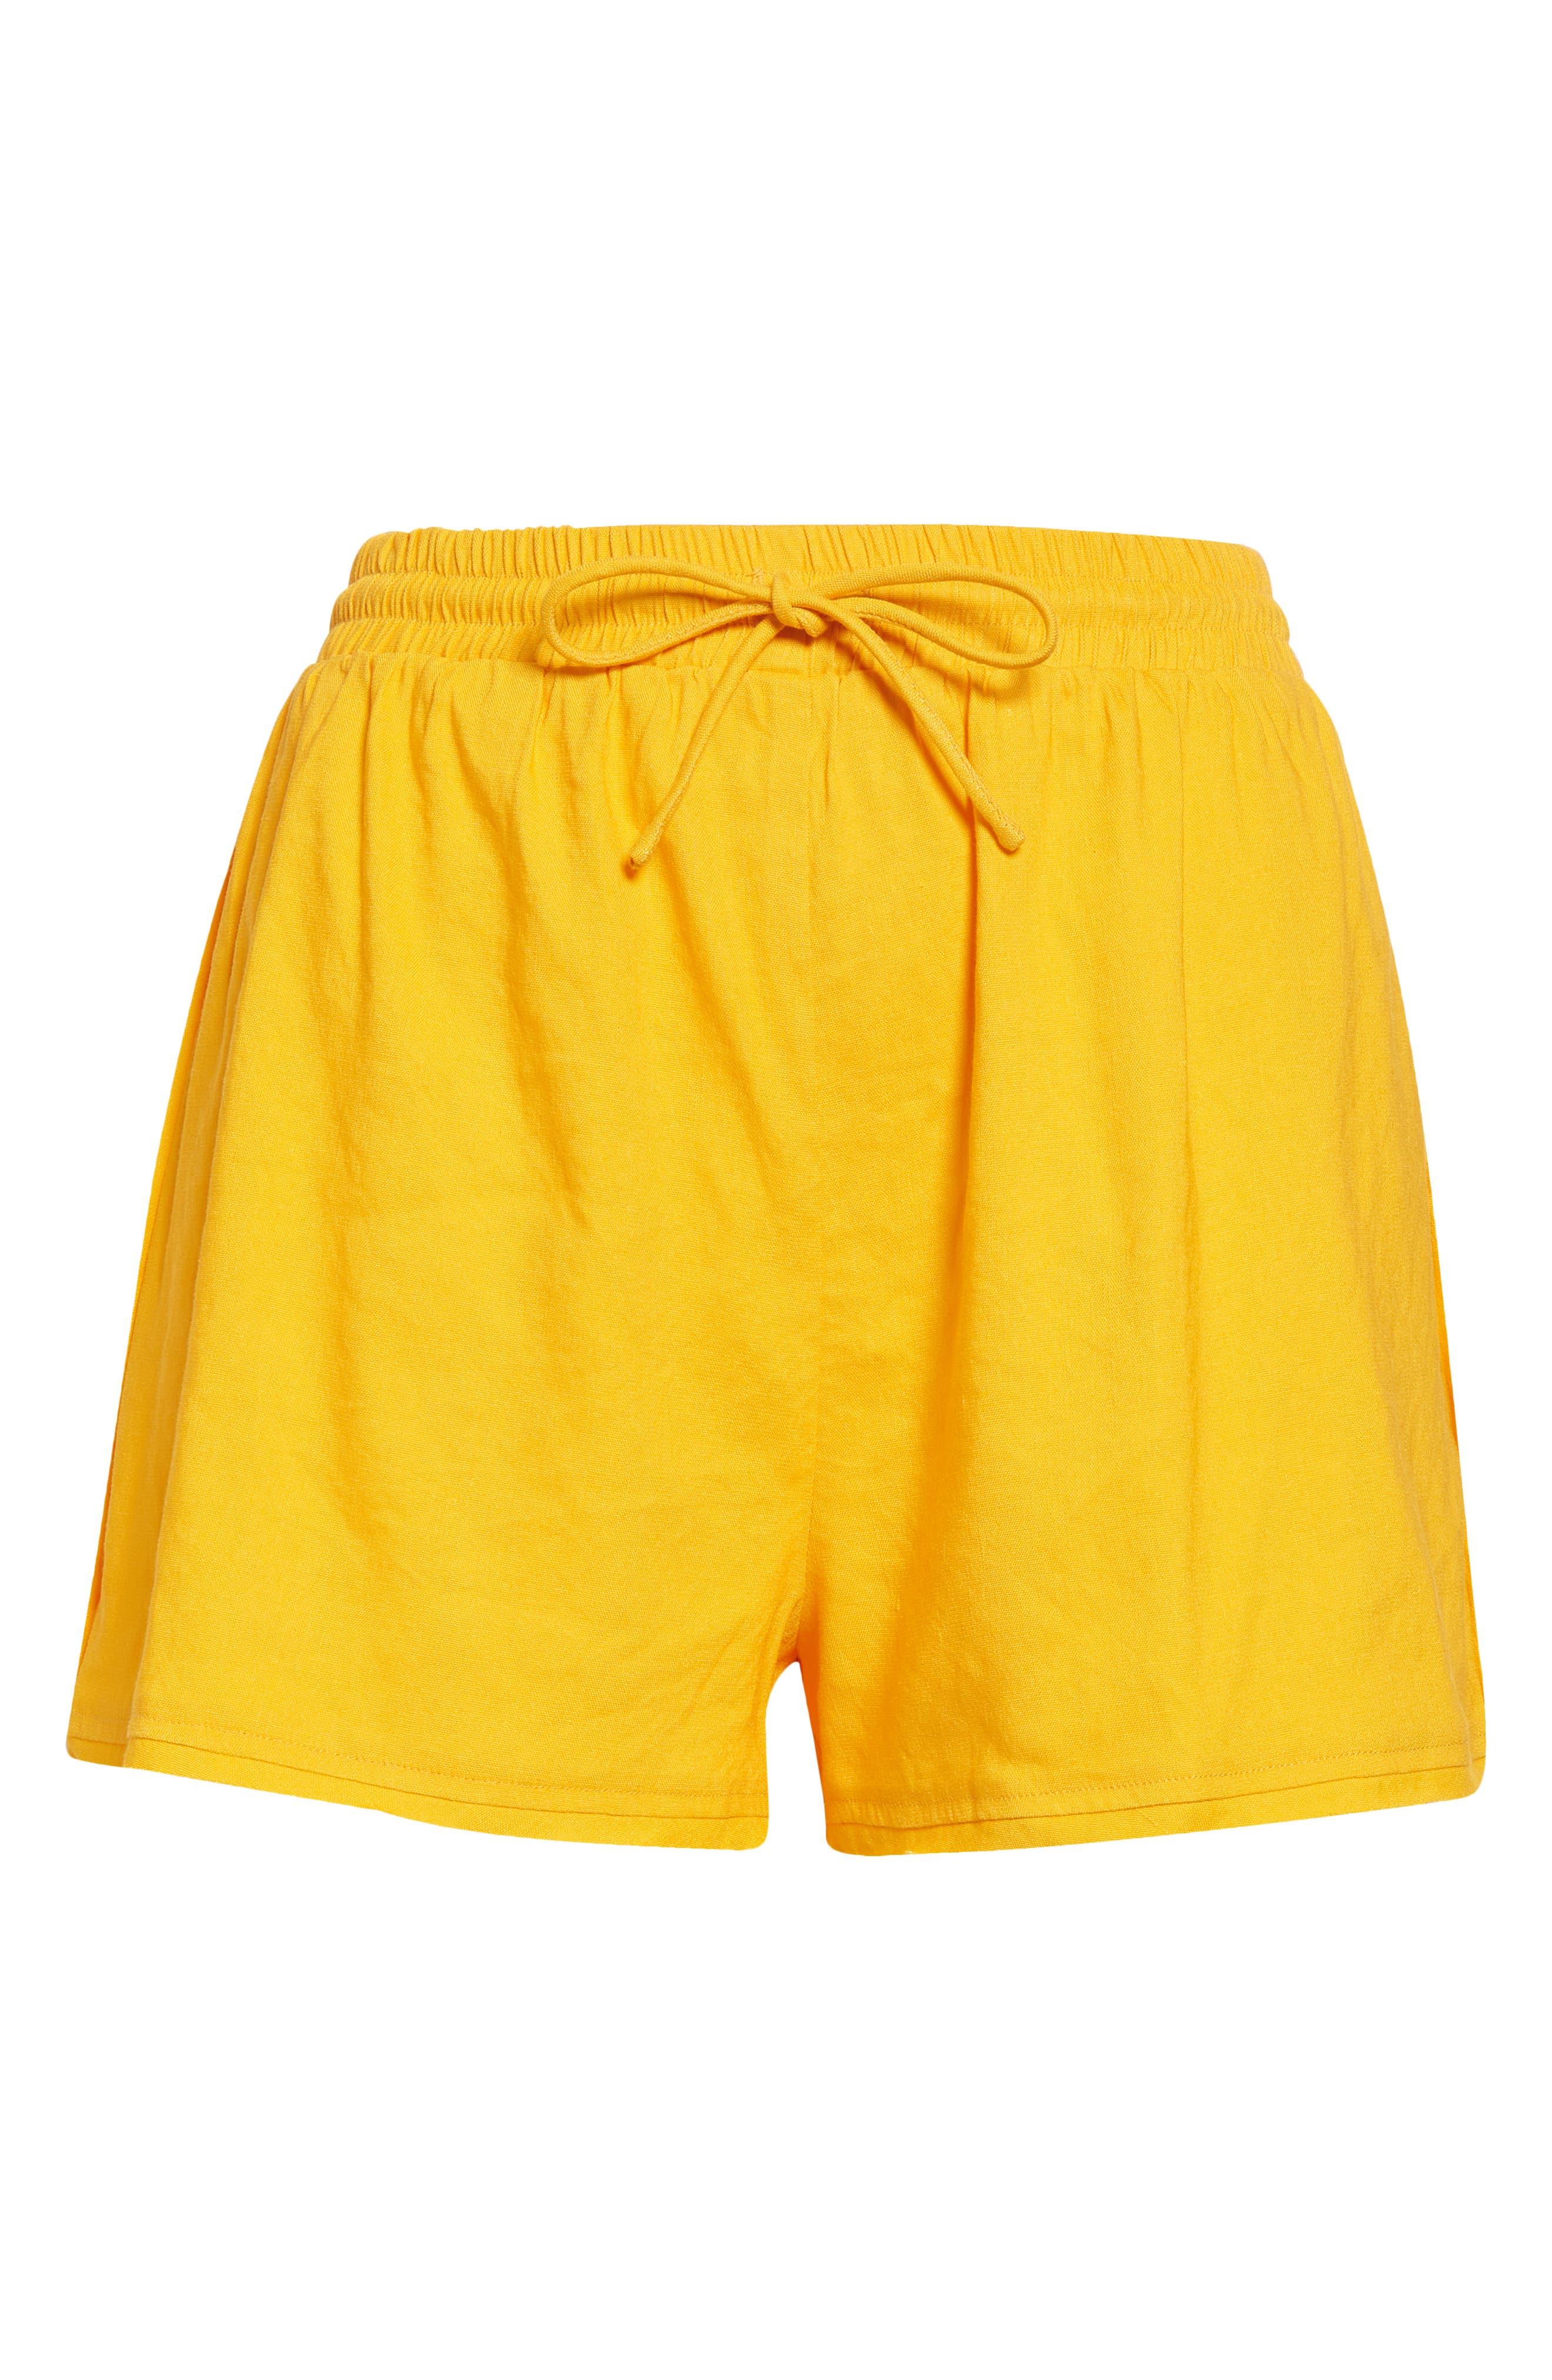 Cult Gaia Sissi Linen Blend Shorts in Yellow | Lyst